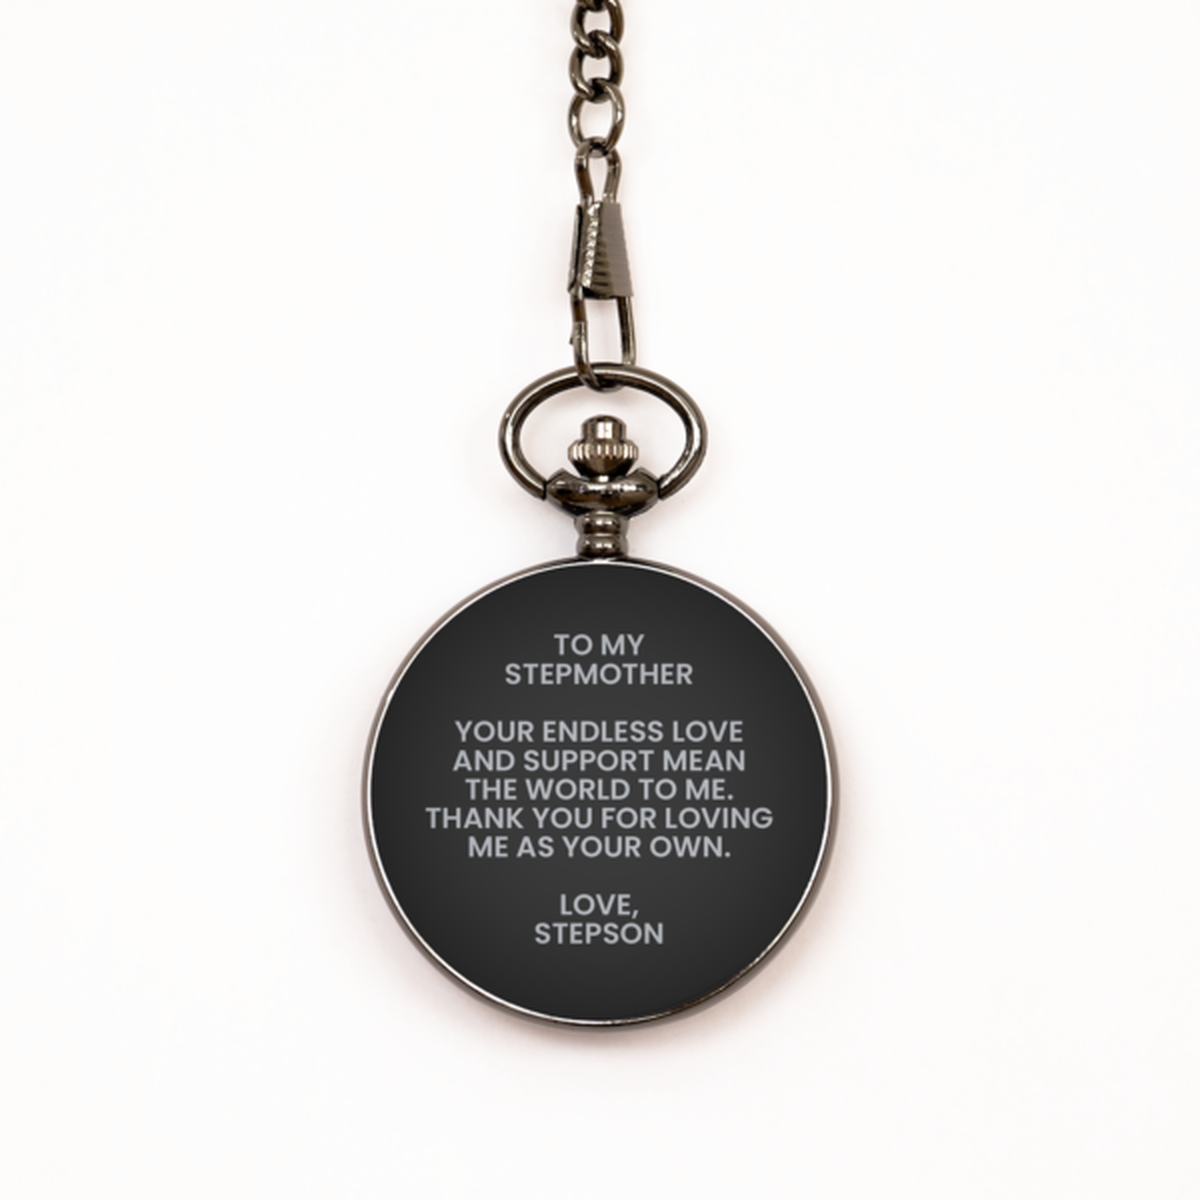 To My Stepmother   Black Pocket Watch, Your Endless Love, Valentines Gifts For Stepmother From Stepson, Birthday Gifts For Women